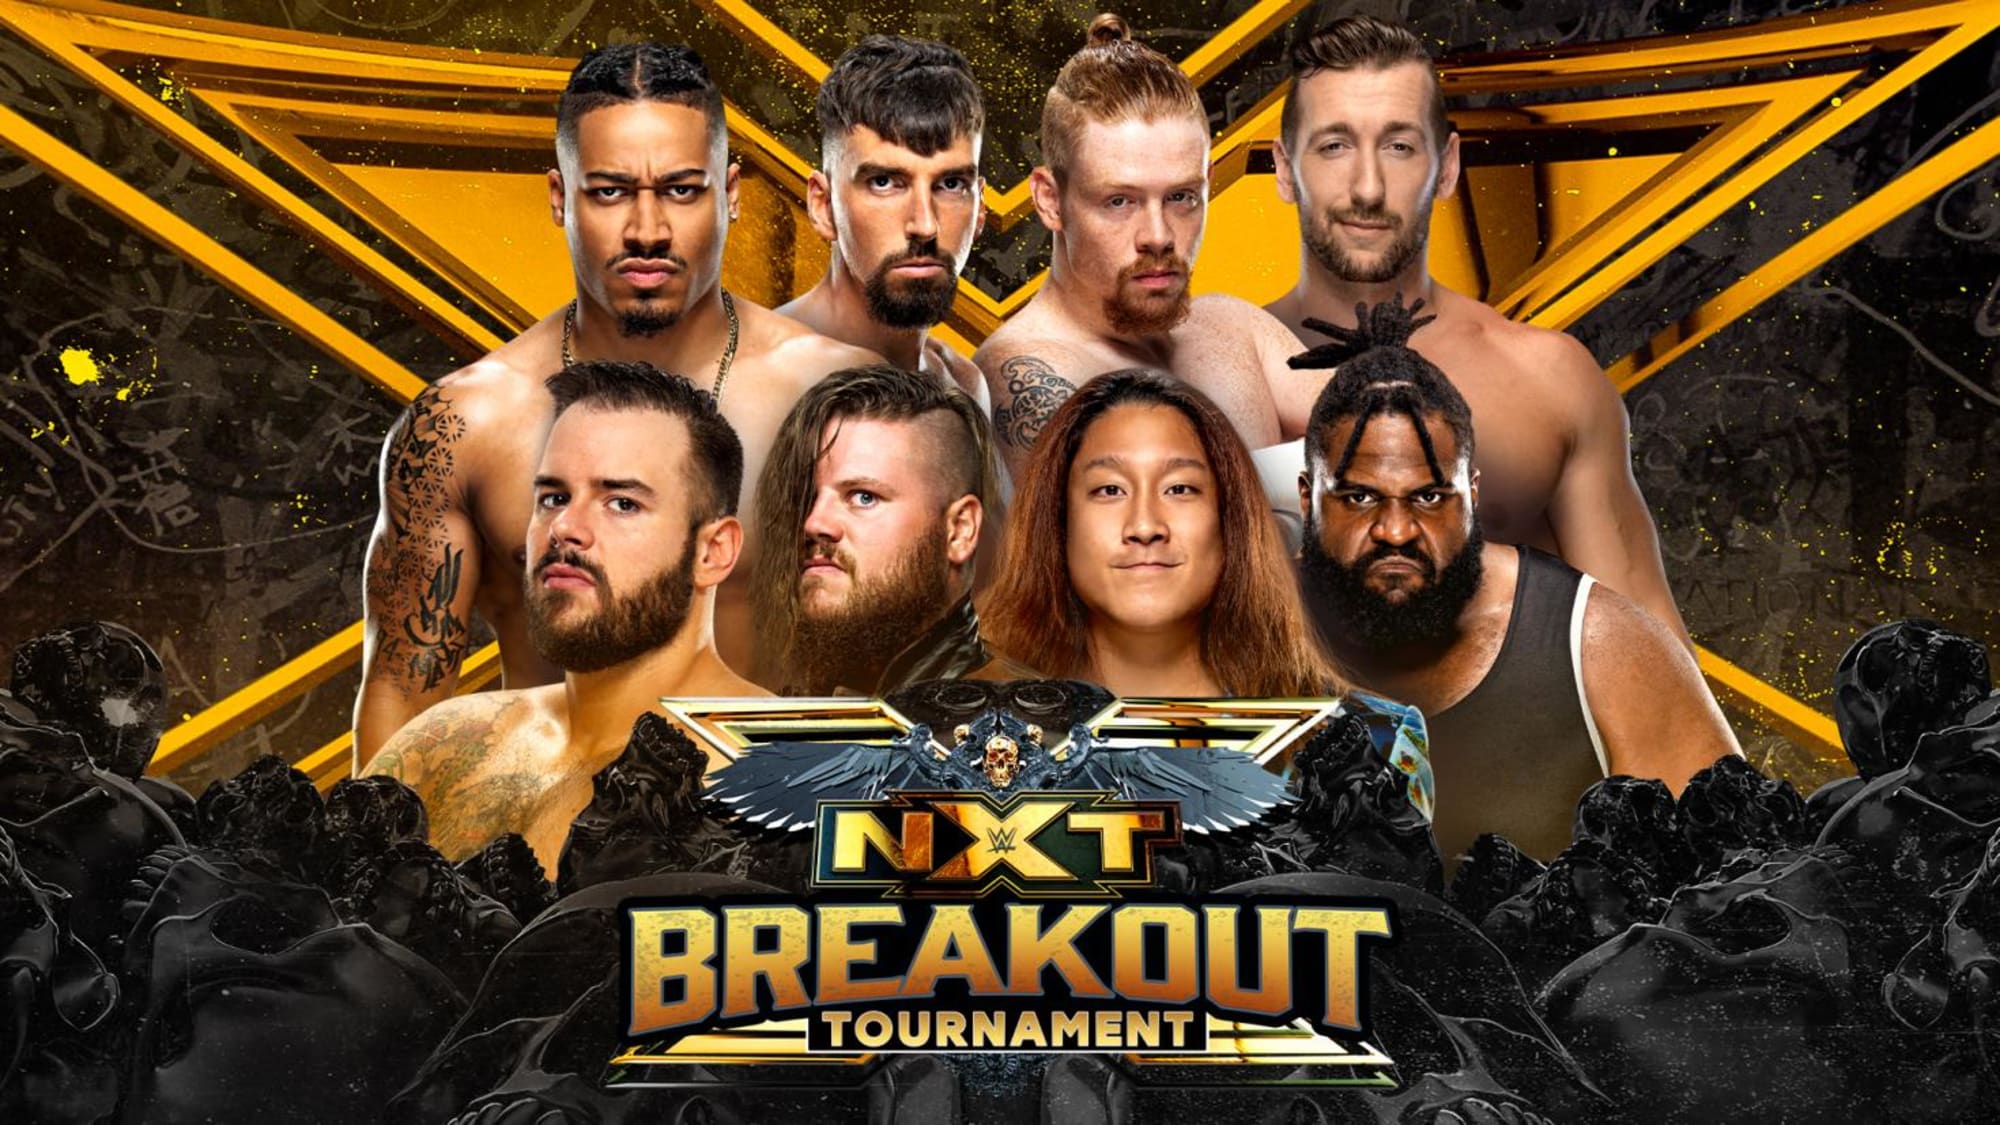 NXT should consider setting fixed times for its tournaments